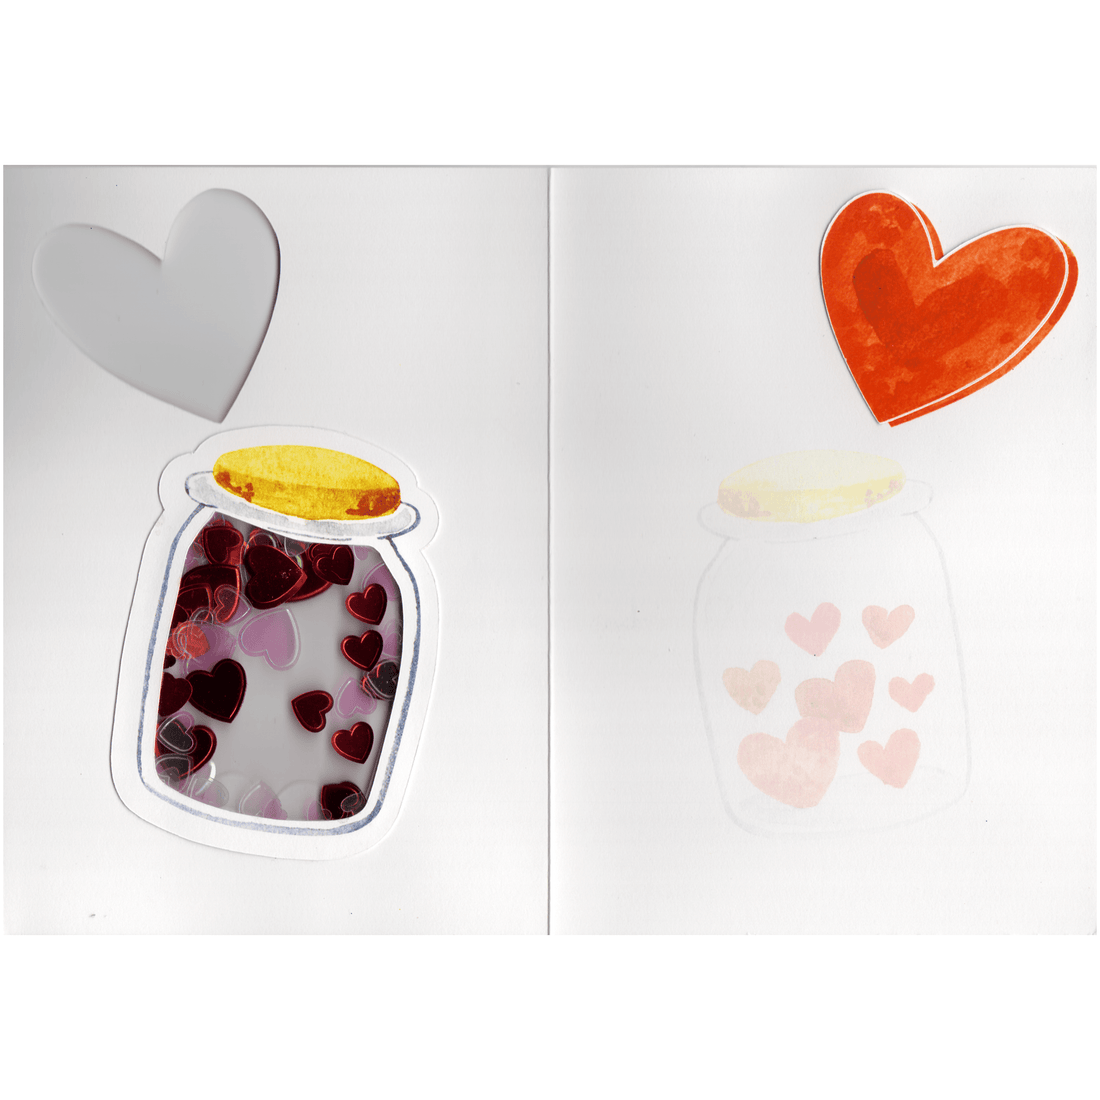 Inside of the heart jar shaker card. To the left the back of the jar is visible as per the front. To the right of the card is a ghosted image of the jar with hearts and on the top right a raised red heart that sits neatly in line with the top of the card when closed.